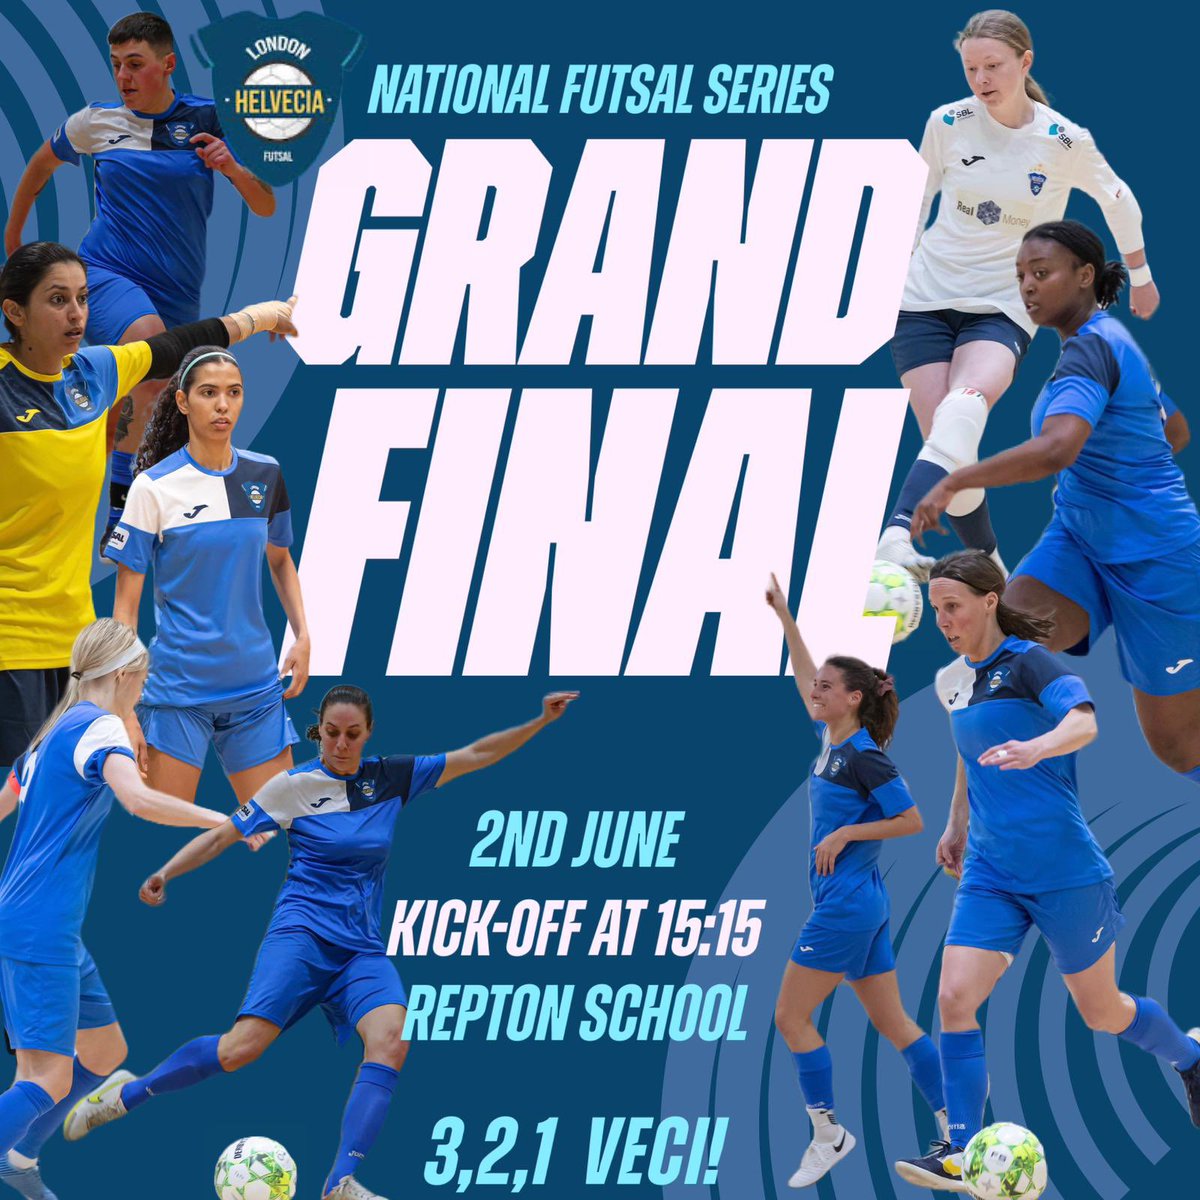 IT’S NEARLY TIME! 

Get ready for the last and most important game of the futsal season, the GRAND FINAL! 🤩🏆

🗓️Sunday 2nd June vs @BFC_futsalclub 
⏰15:15
📍Repton School 
📺TNT sports